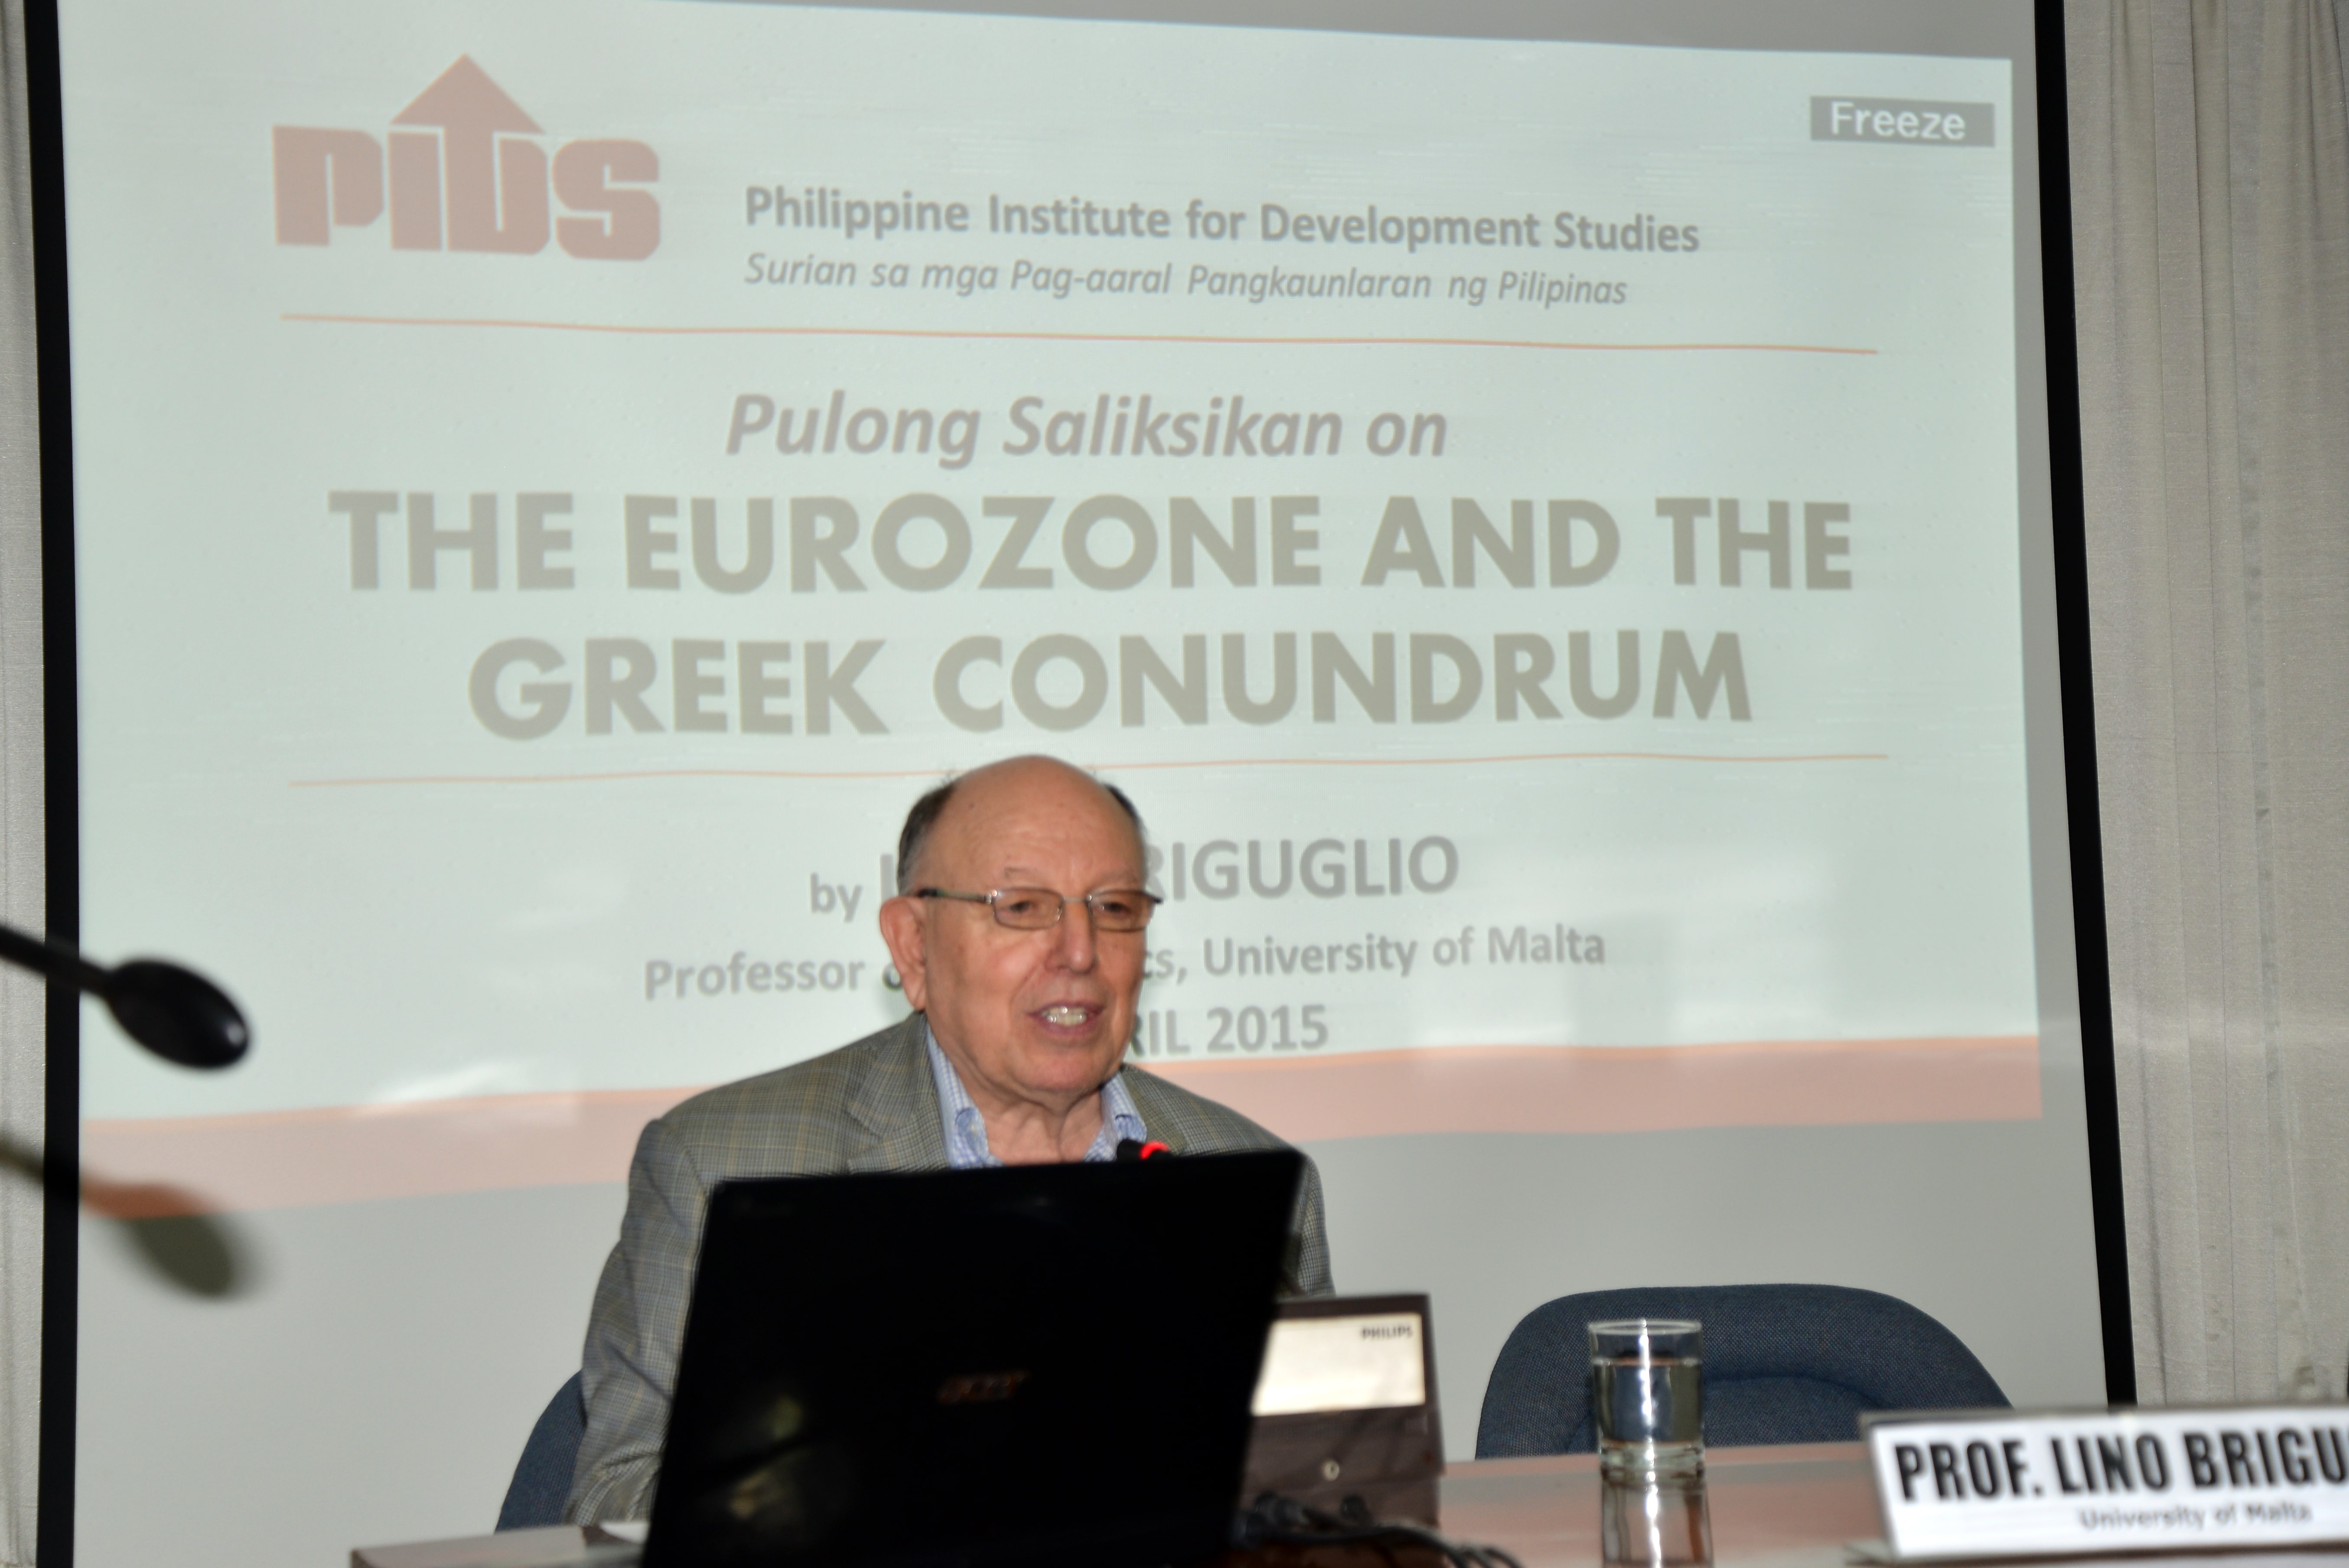 Pulong Saliksikan On The Eurozone And The Greek Conundrum-DSC_1278.jpg